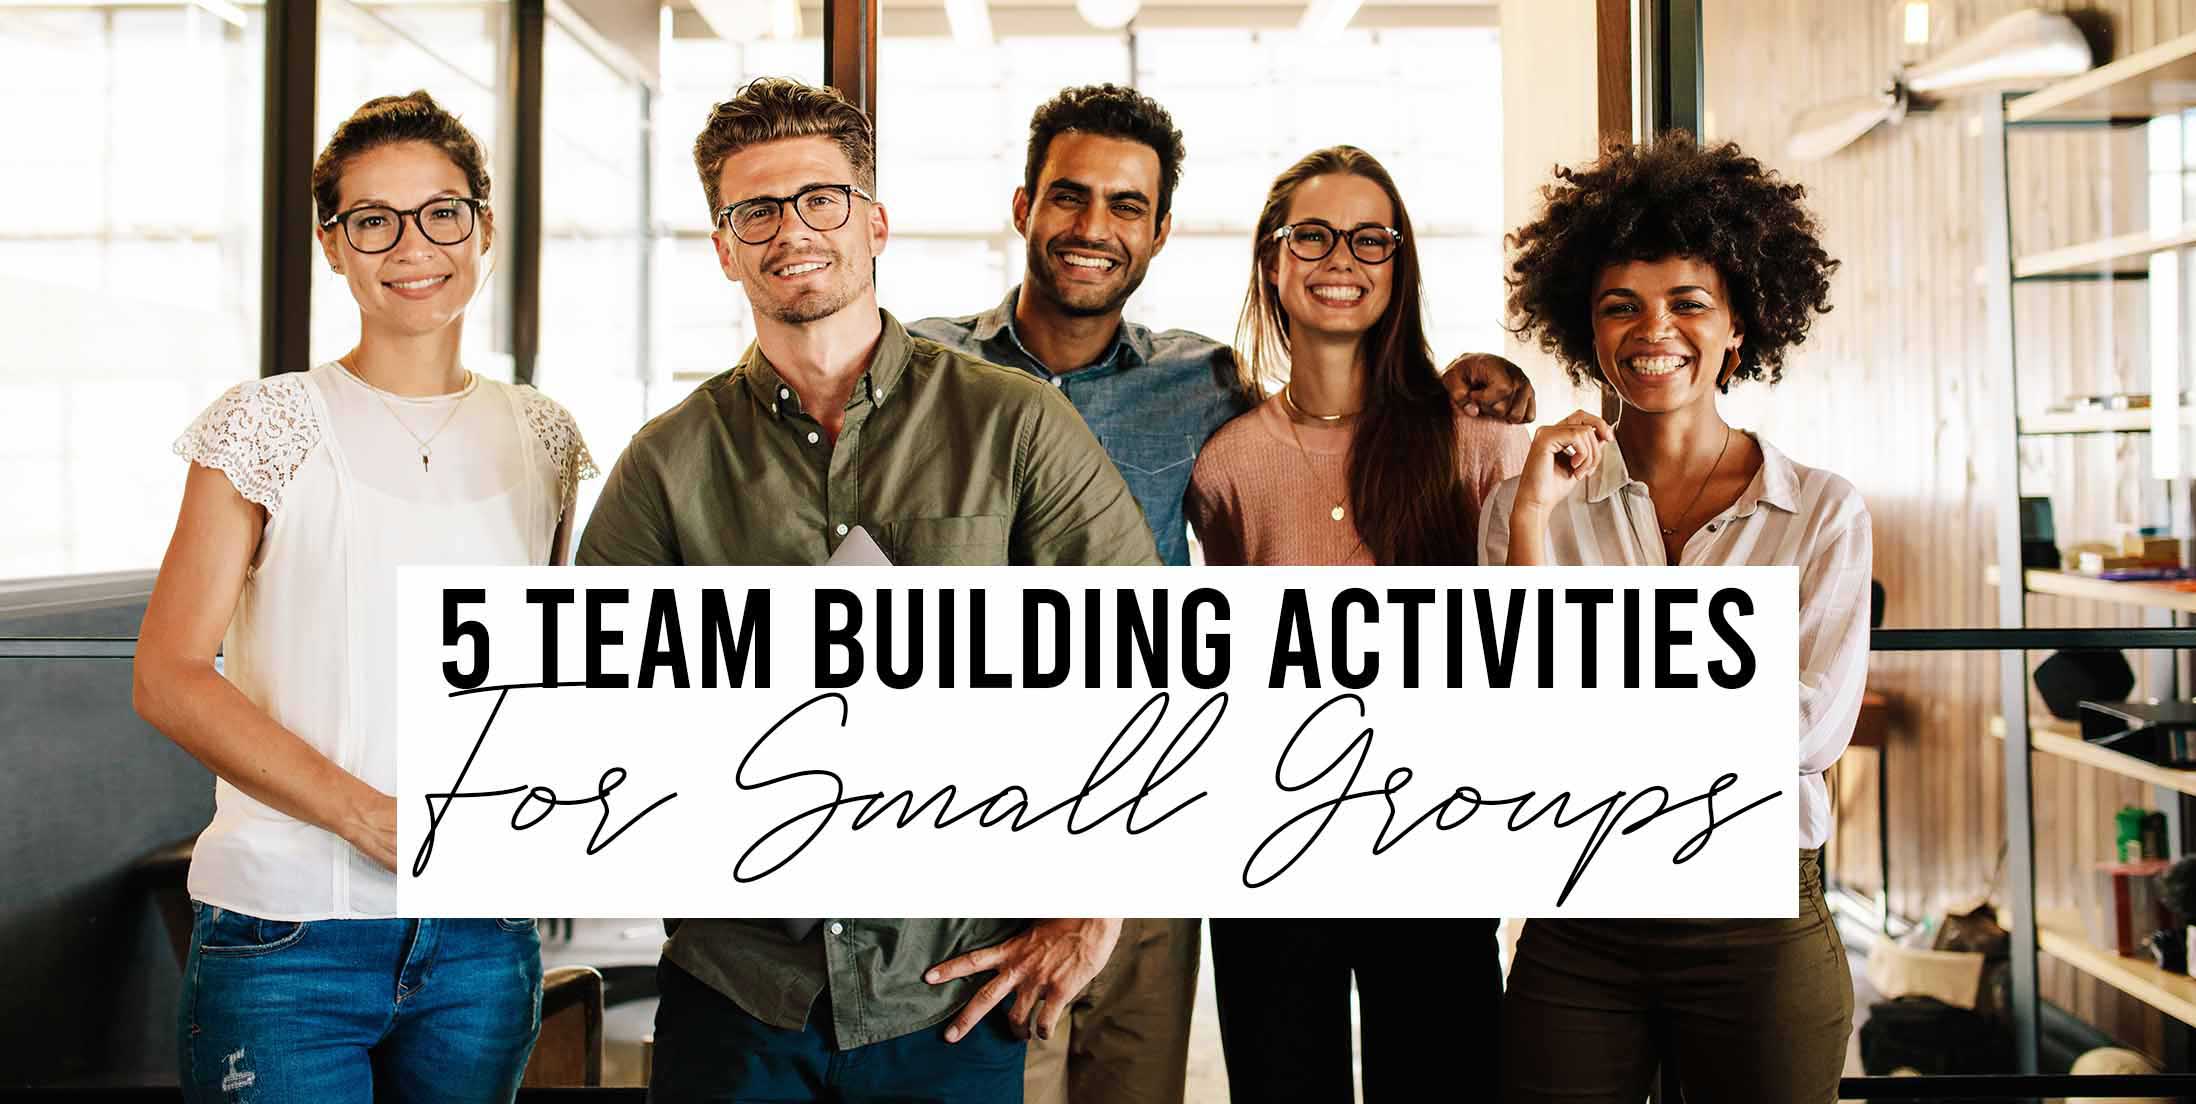 5 Team Building Activities for Small Groups 